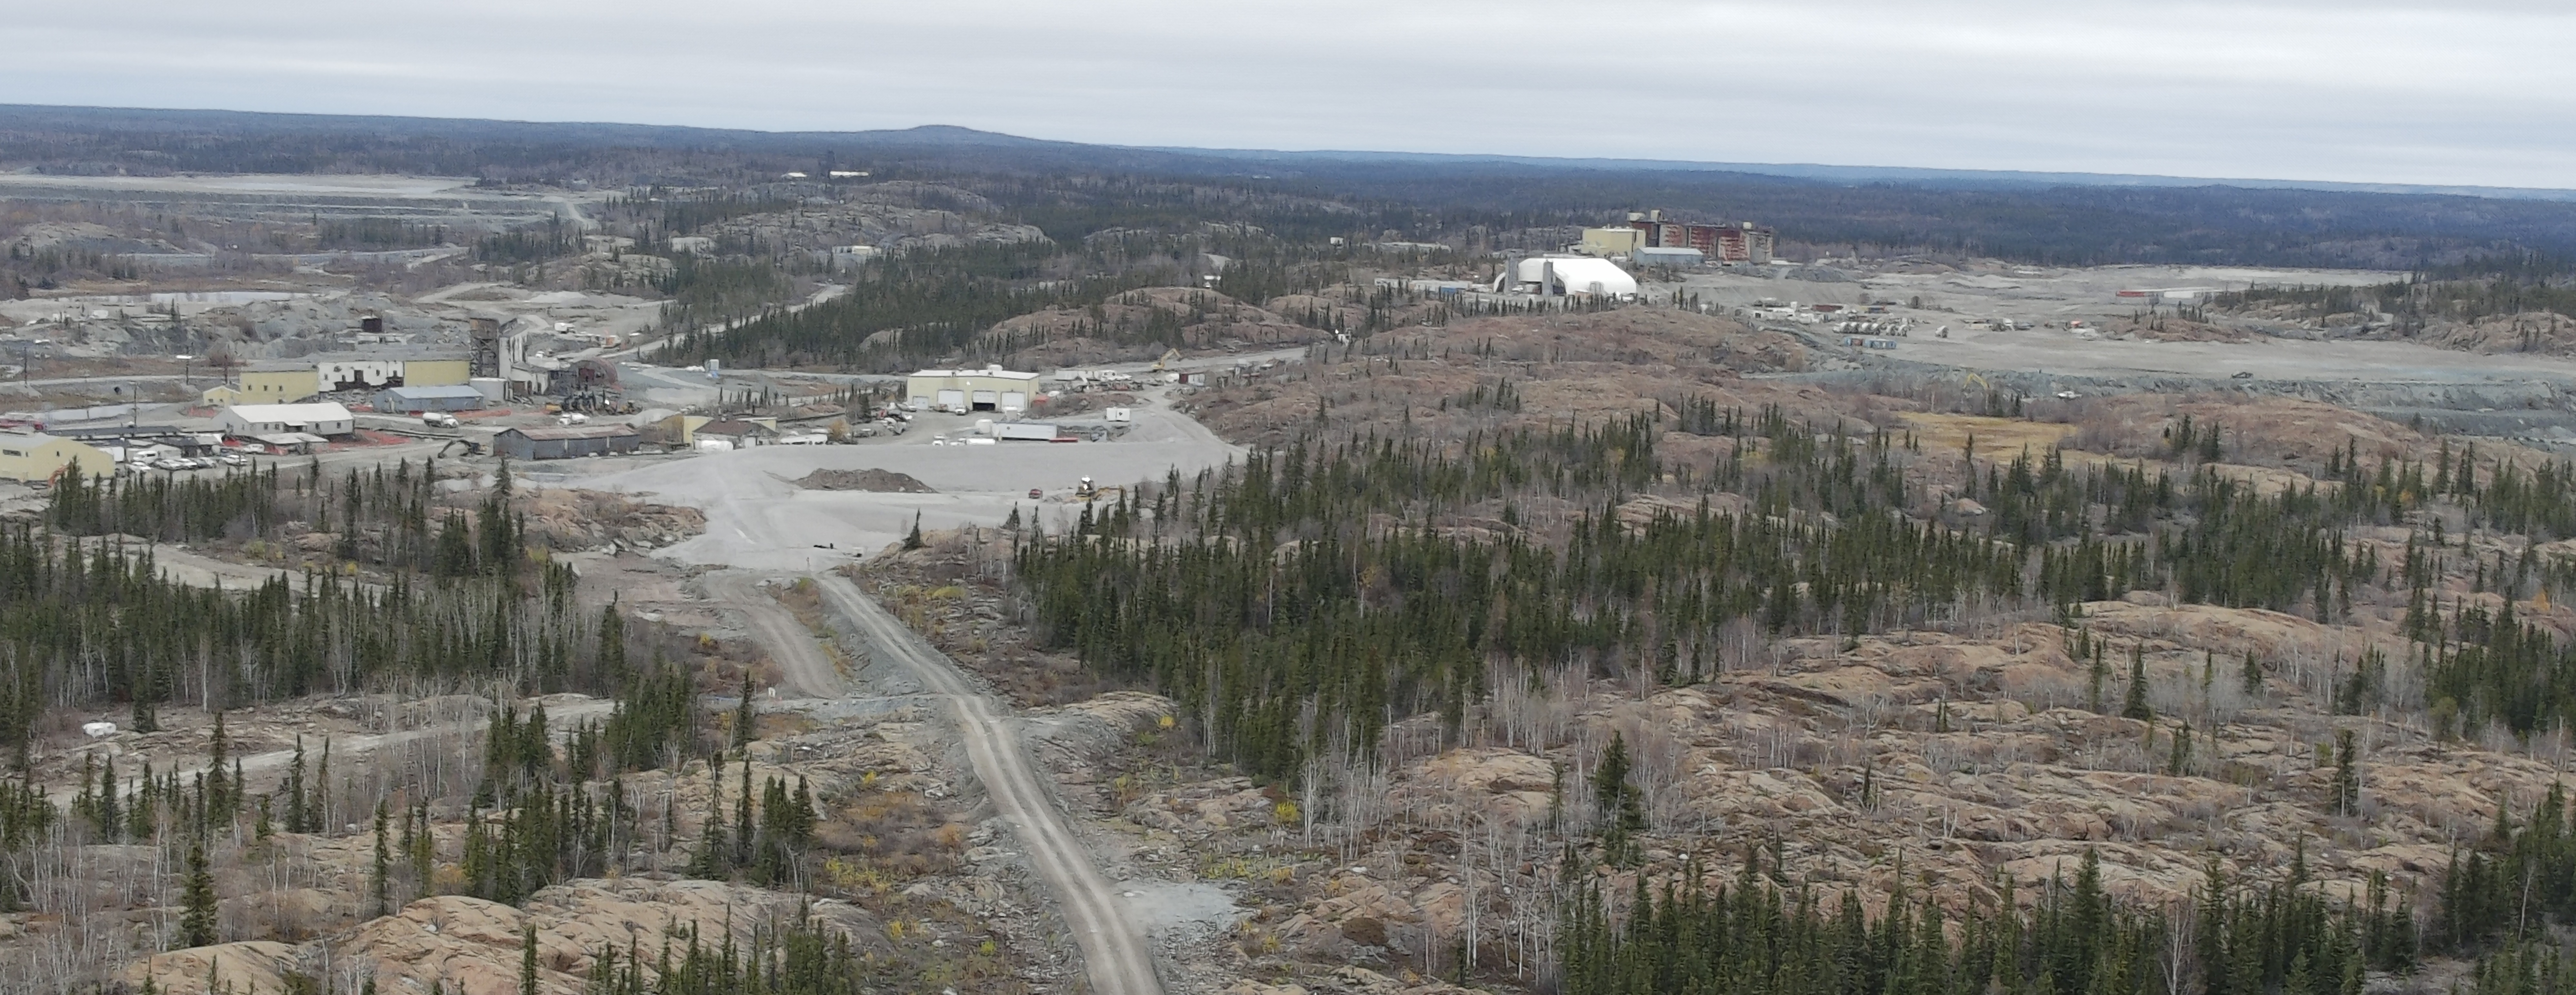 Site of Giant Mine Remediation